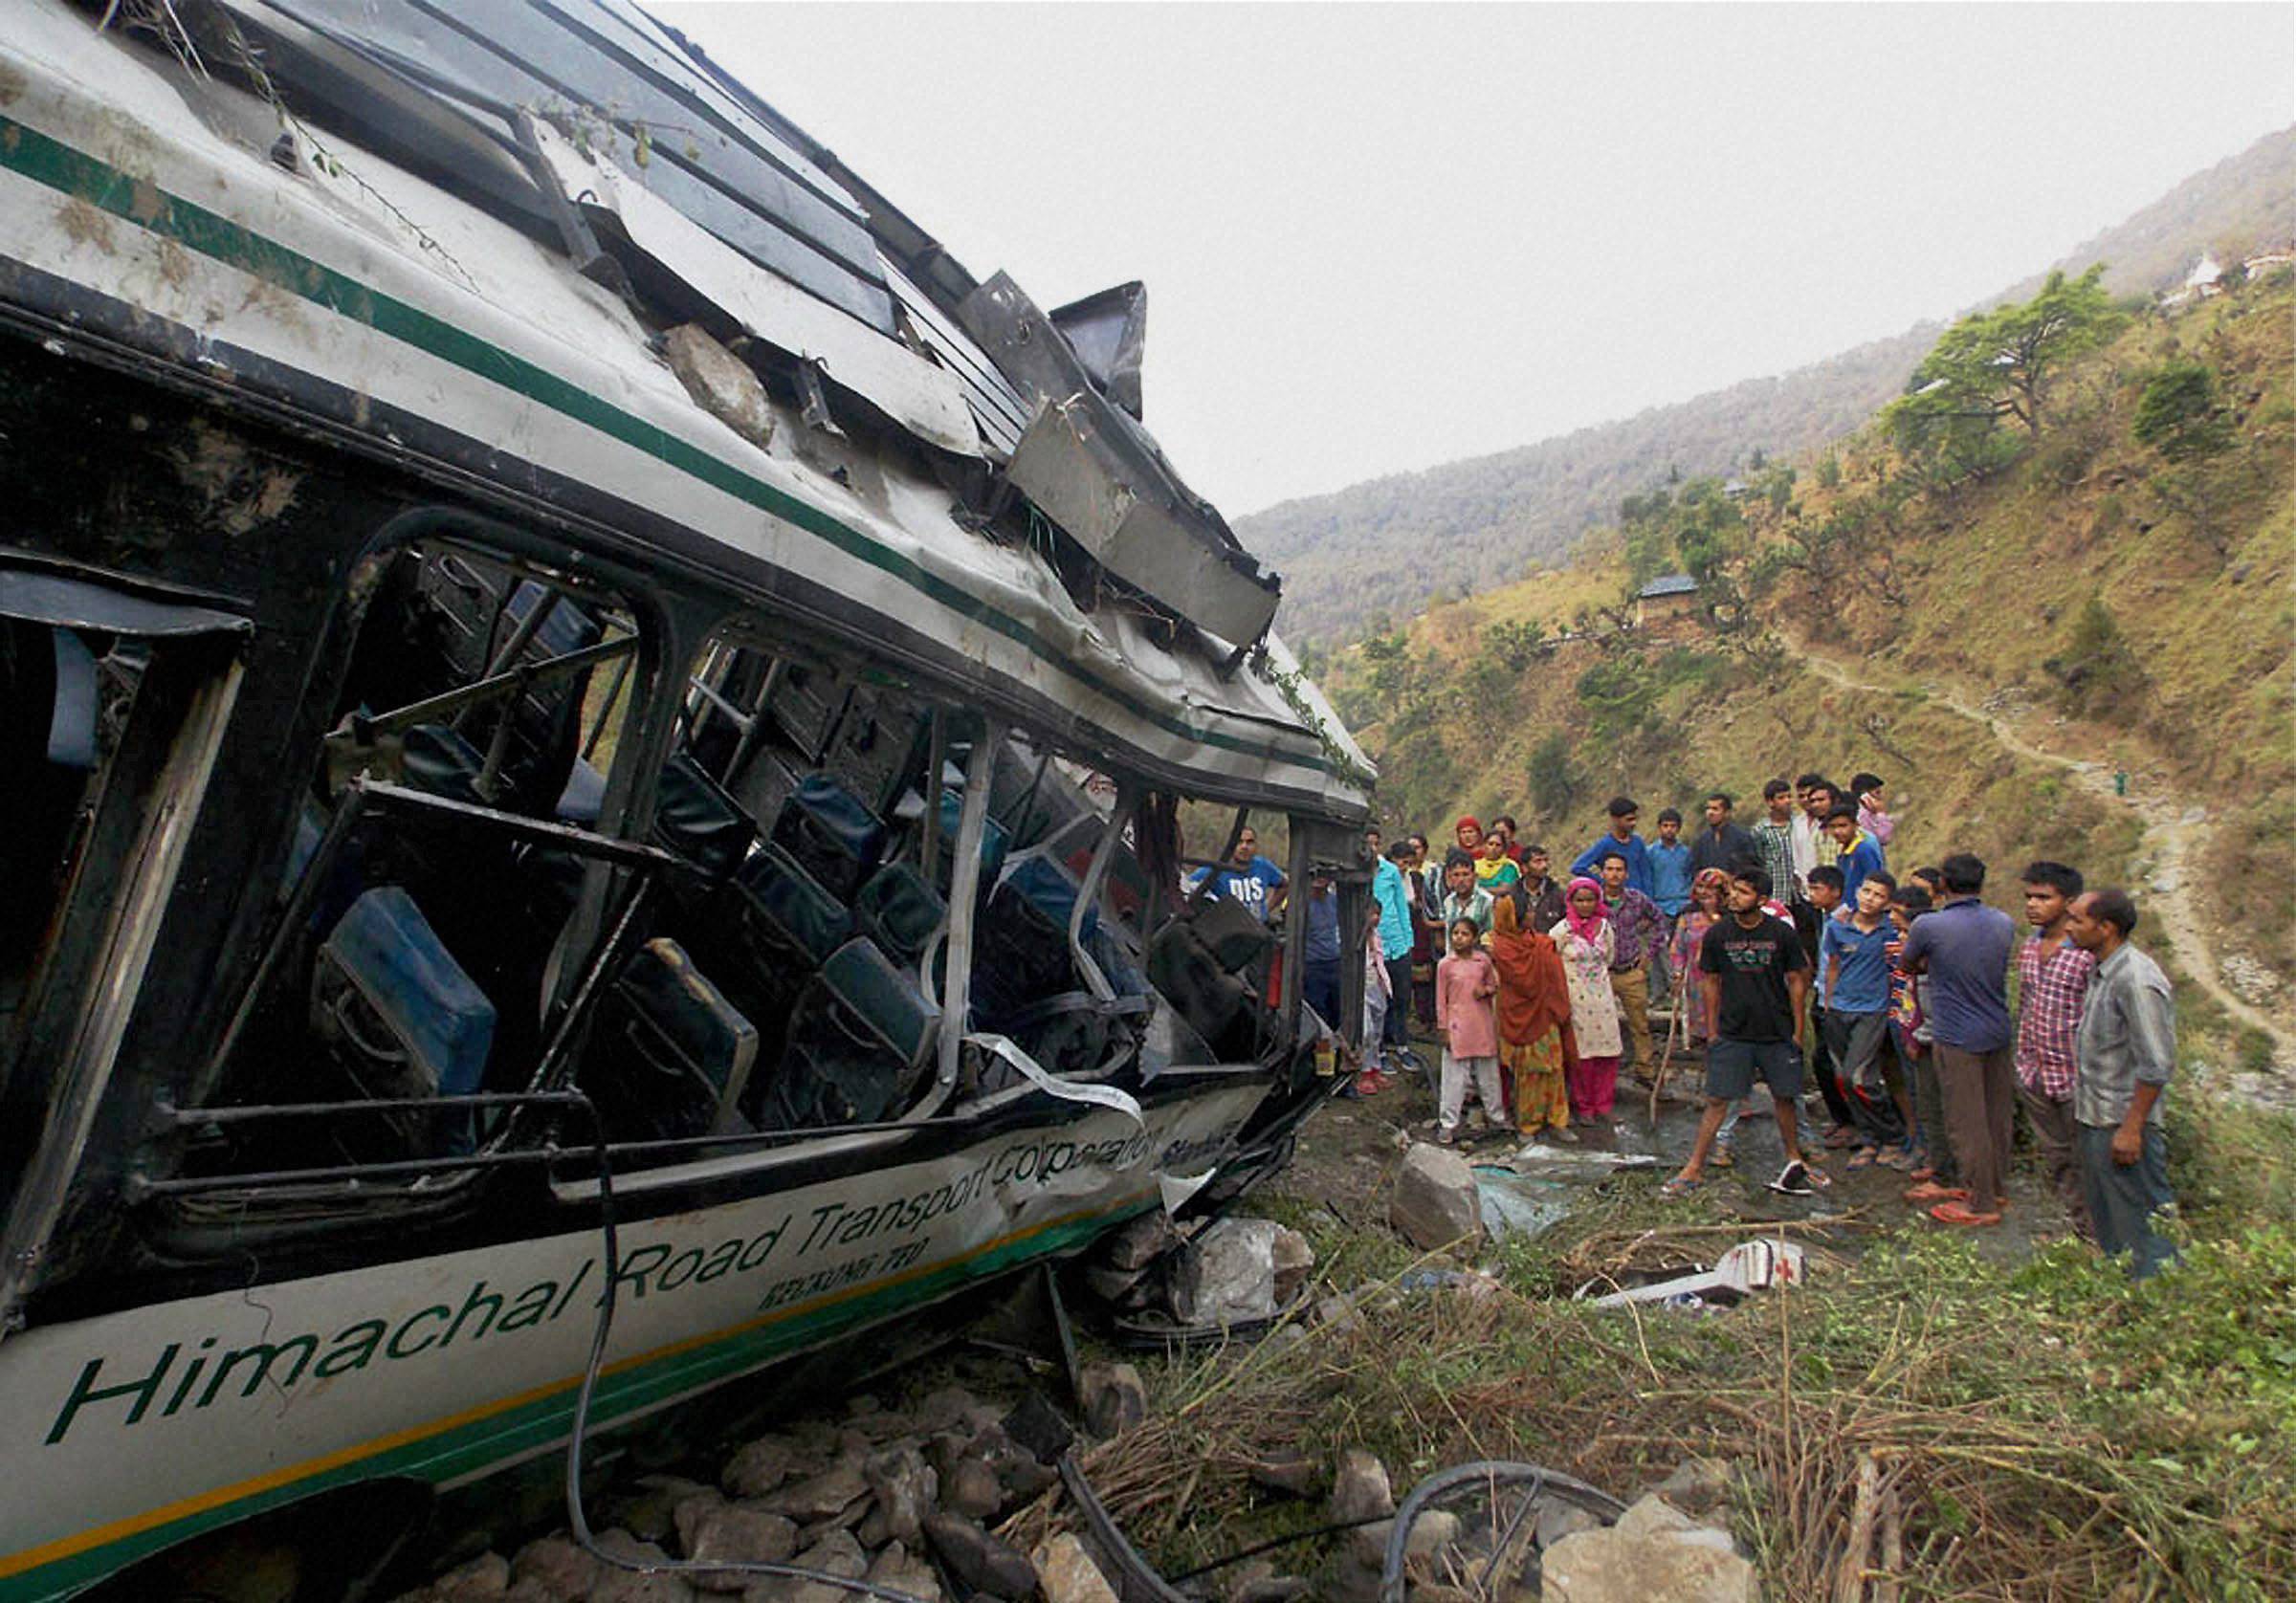 22 Dead Over 70 Injured In Separate Road Accidents In Himachal Pradesh